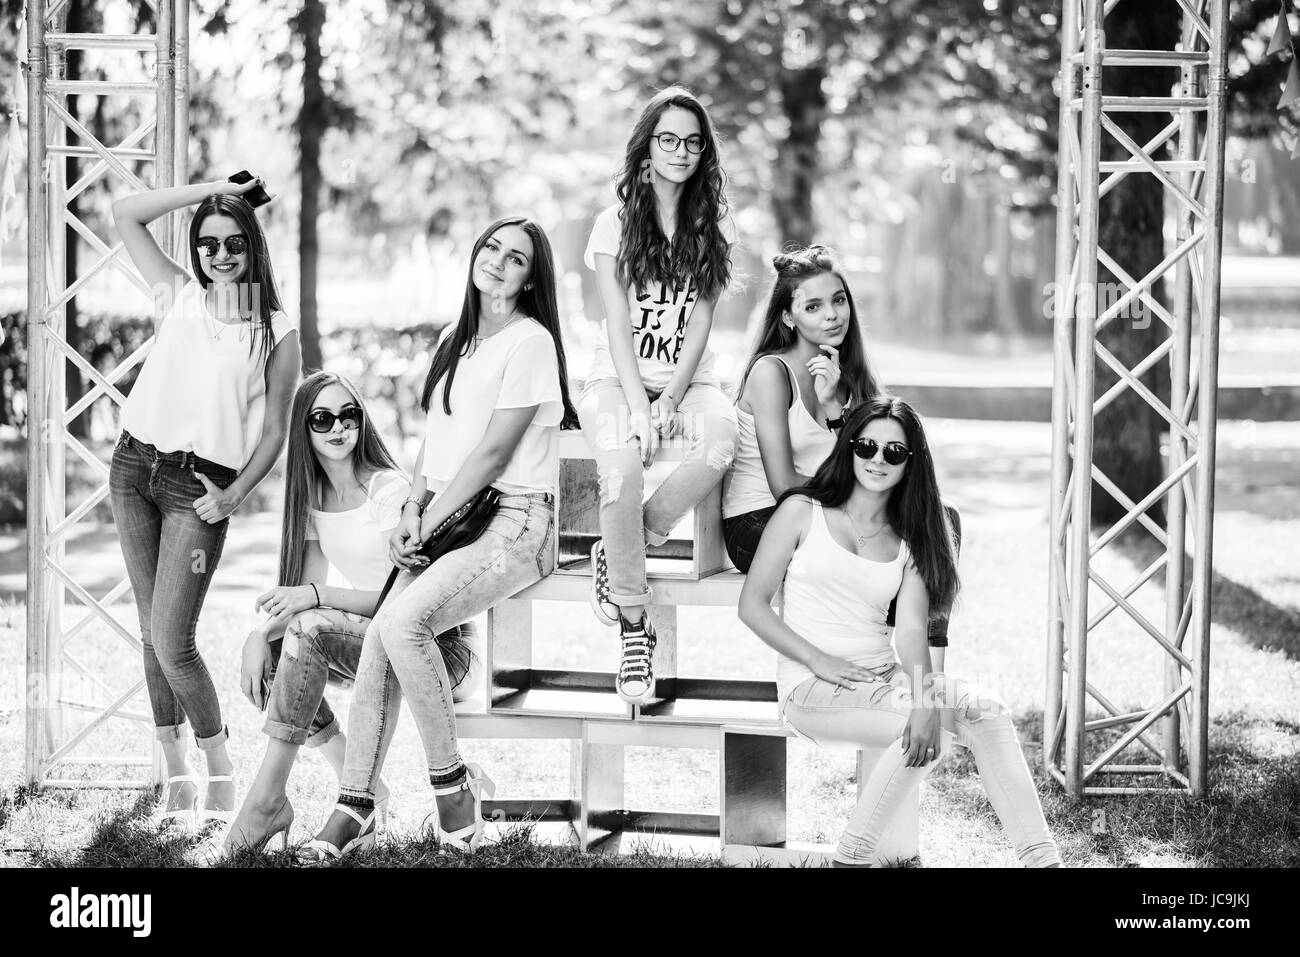 Six wonderful model girls posing on wooden boxes in the park on a sunny day. Black and white photo. Stock Photo